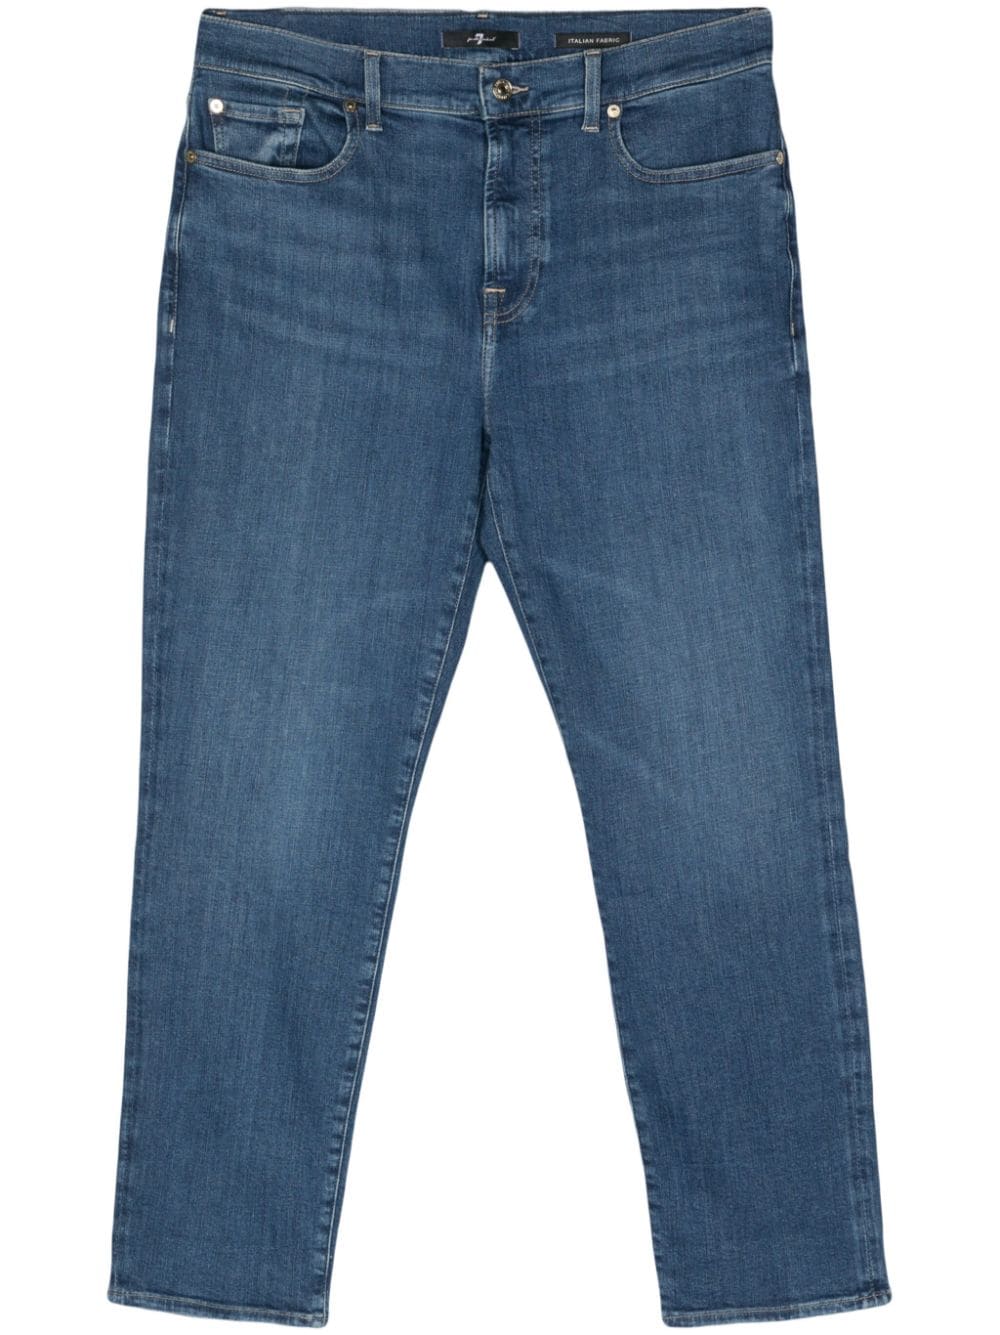 7 For All Mankind relaxed skinny jeans - Blue von 7 For All Mankind